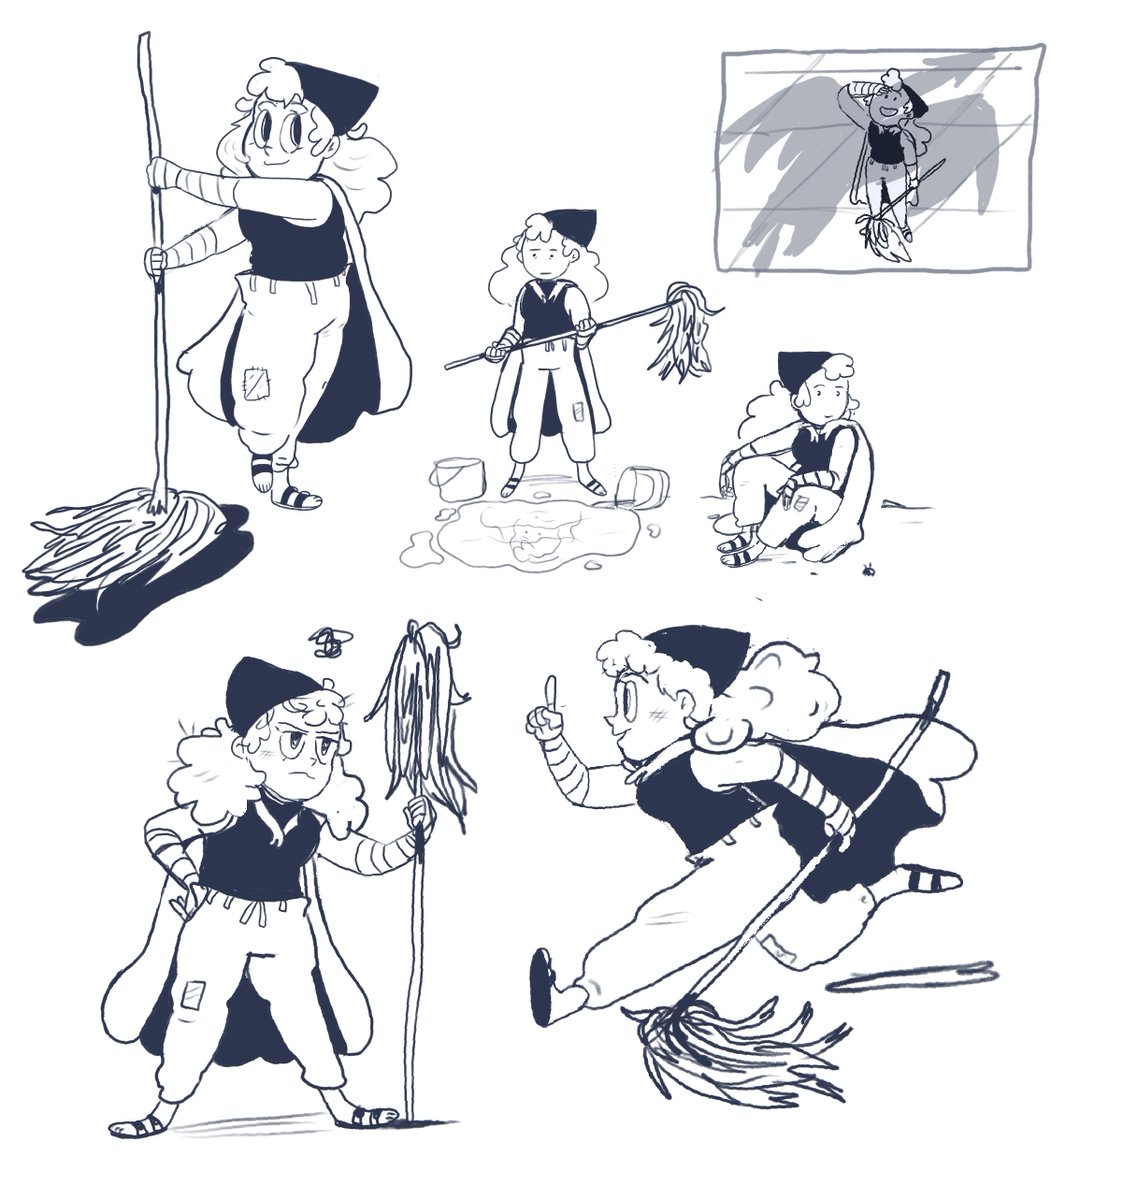 little character exploration for a new personal storyboard I want to make… her name is Minty, she works at a dead end job cleaning and polishing the scales of the town’s dragons, but she dreams of riding one (which is forbidden)